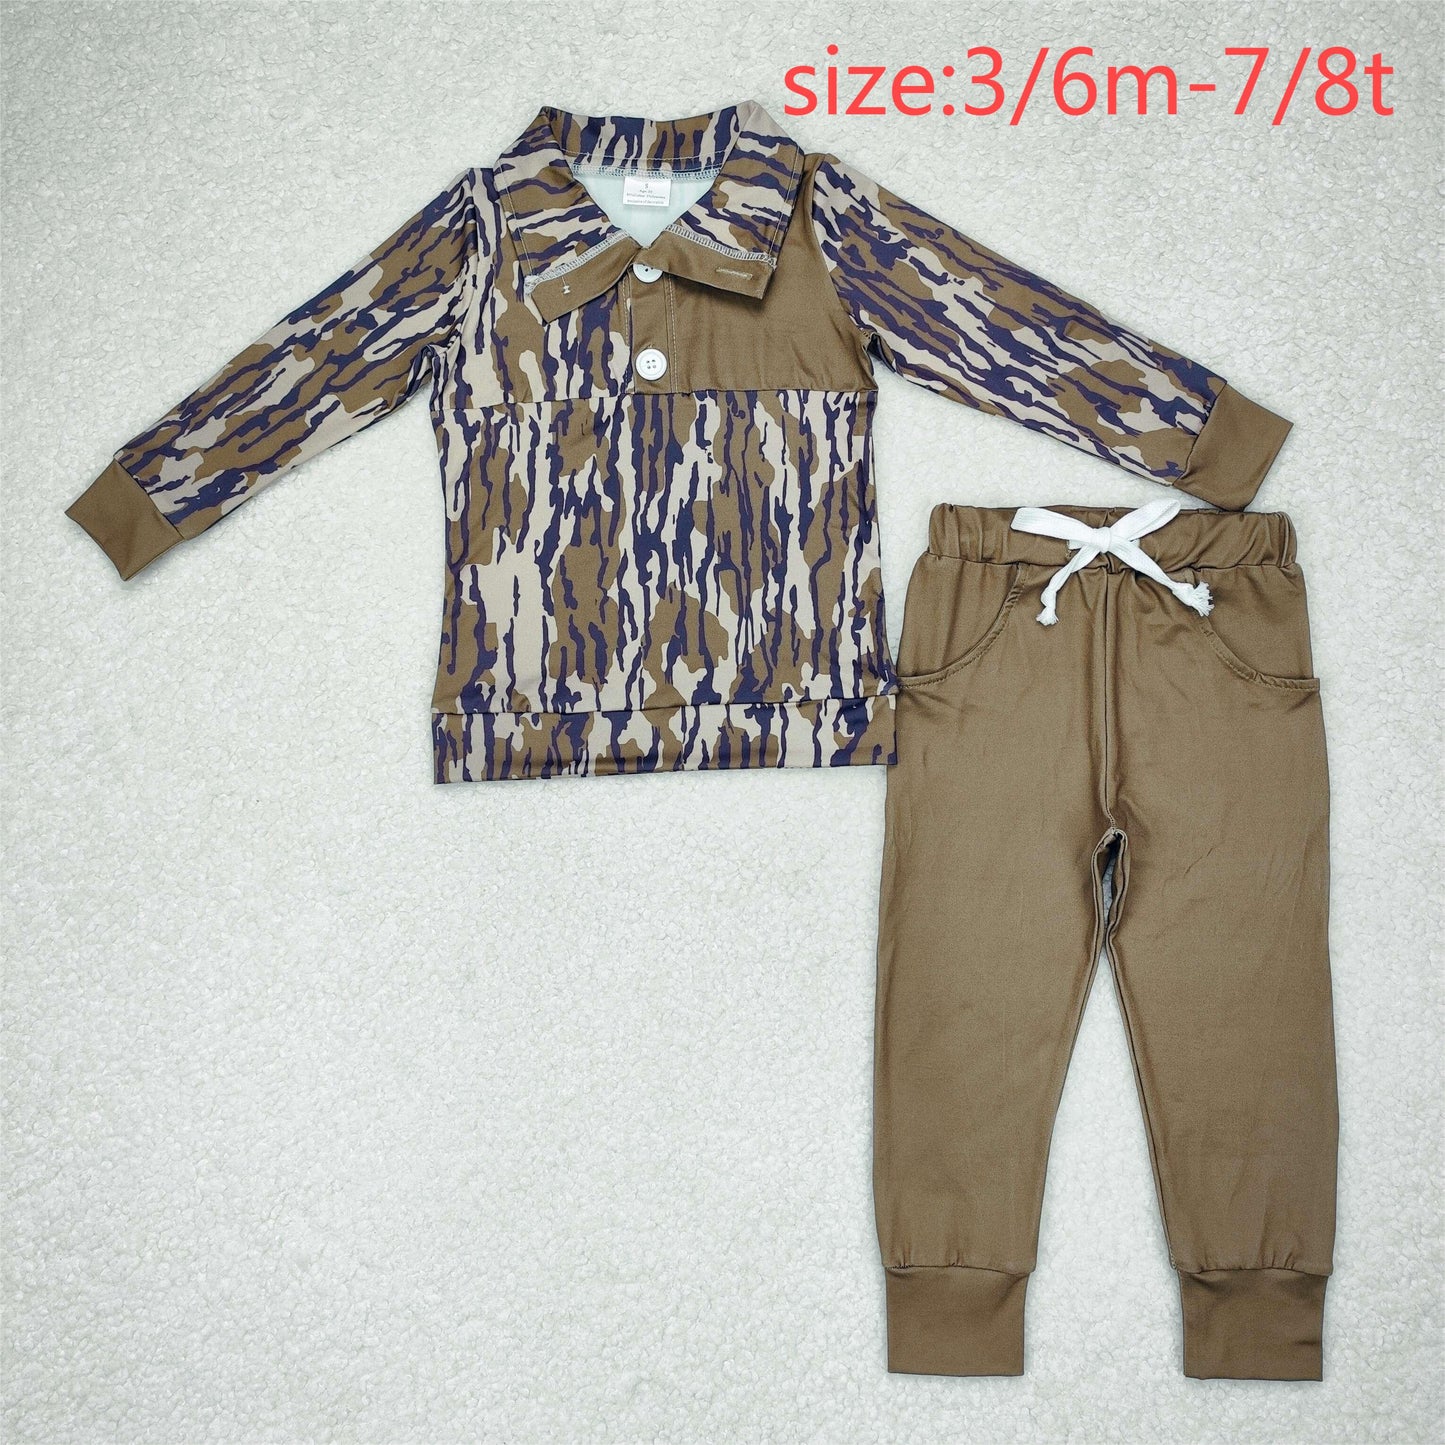 rts no moq BLP0492 Military green camouflage button long-sleeved brown trousers suit